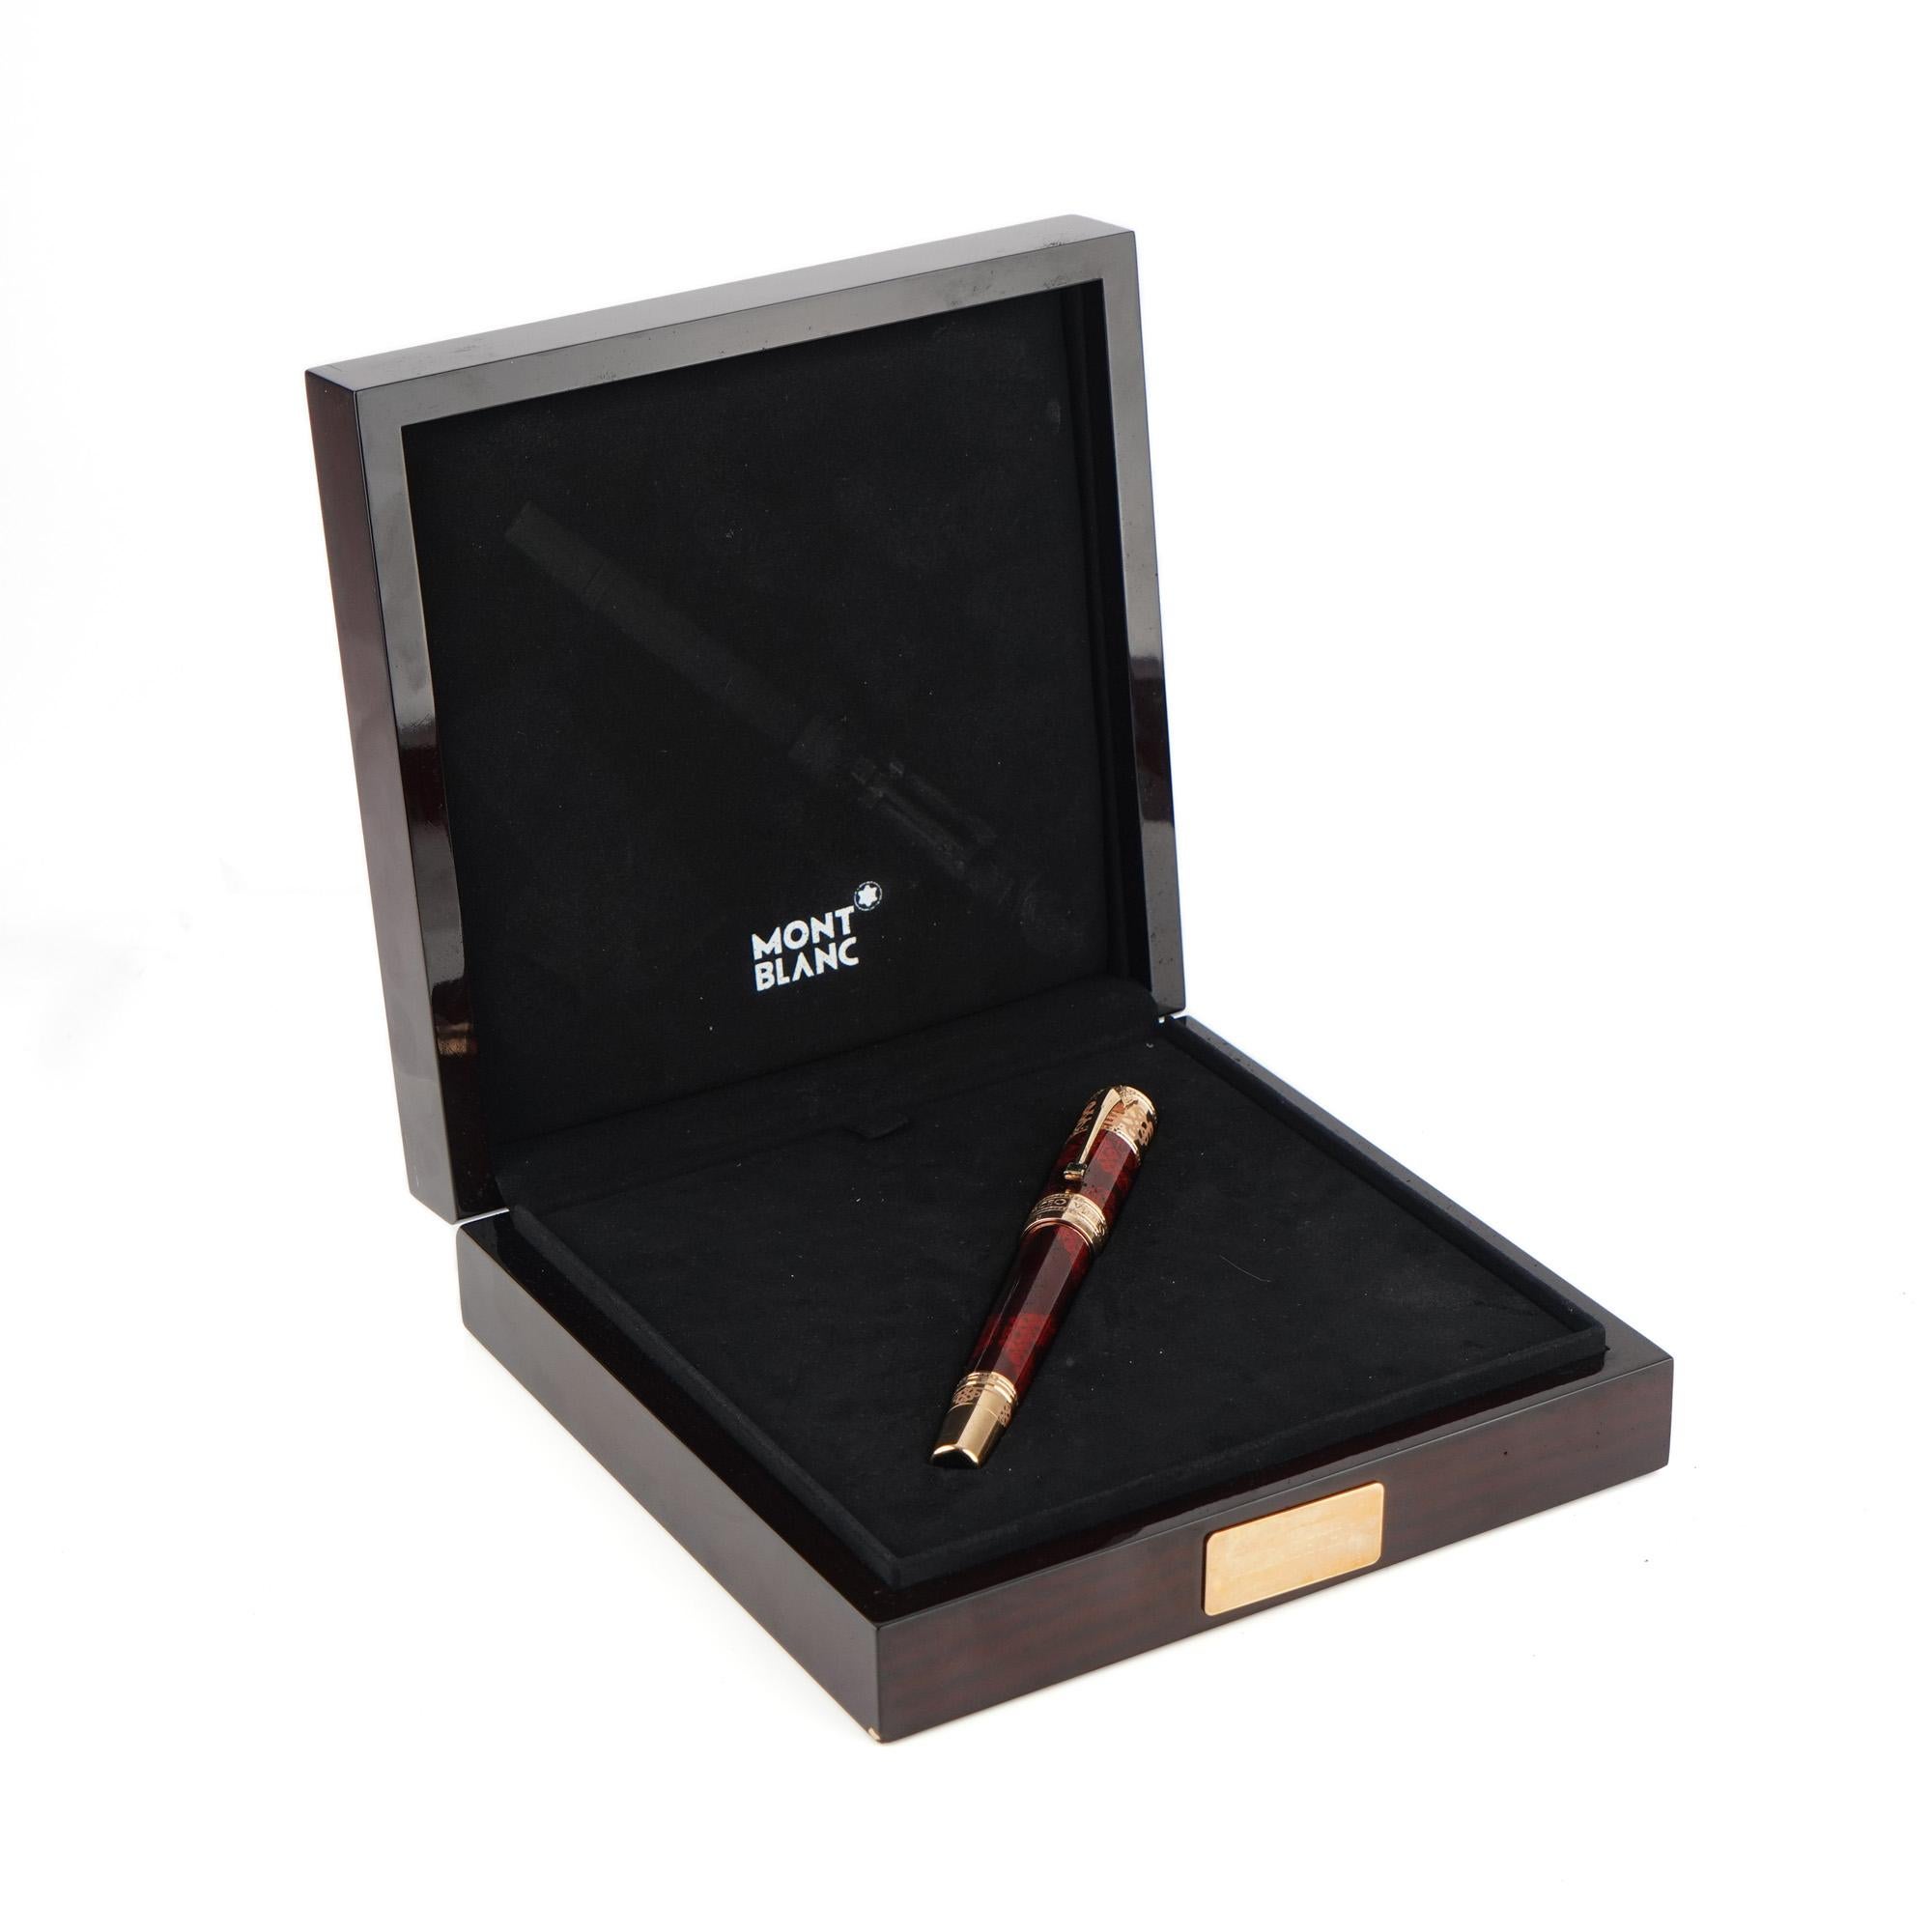 Montblanc: Elizabeth I Patron of Art Series Limited Edition 612/888 Fountain Pen
Limited edition number 612 of 888.

Perhaps the most influential of English monarchs, Elizabeth I is remembered not only for her foreign policy successes, which